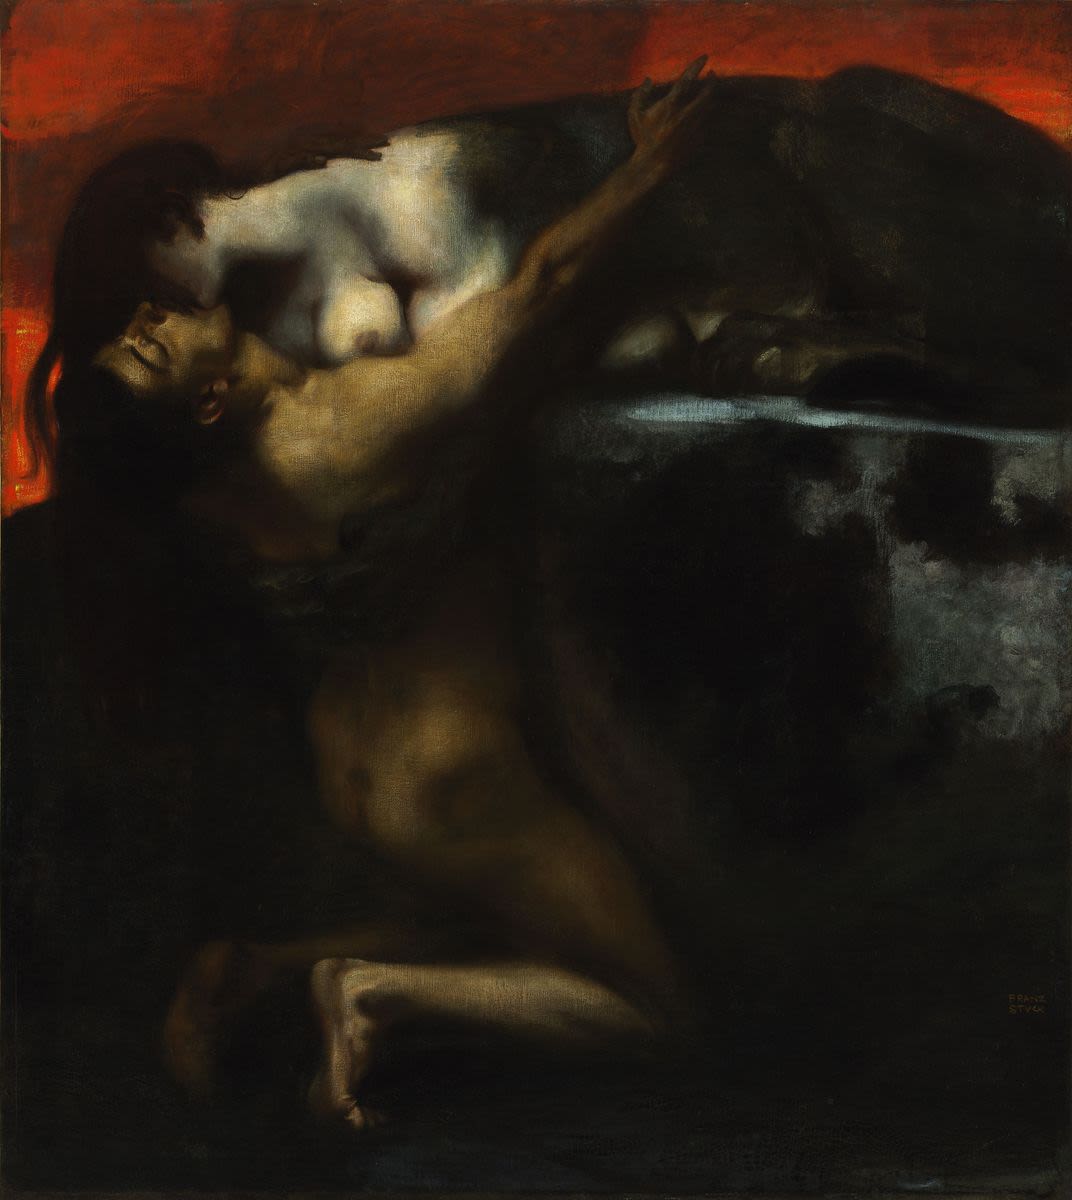 Franz von Stuck’s 1895 painting The Kiss of the Sphinx